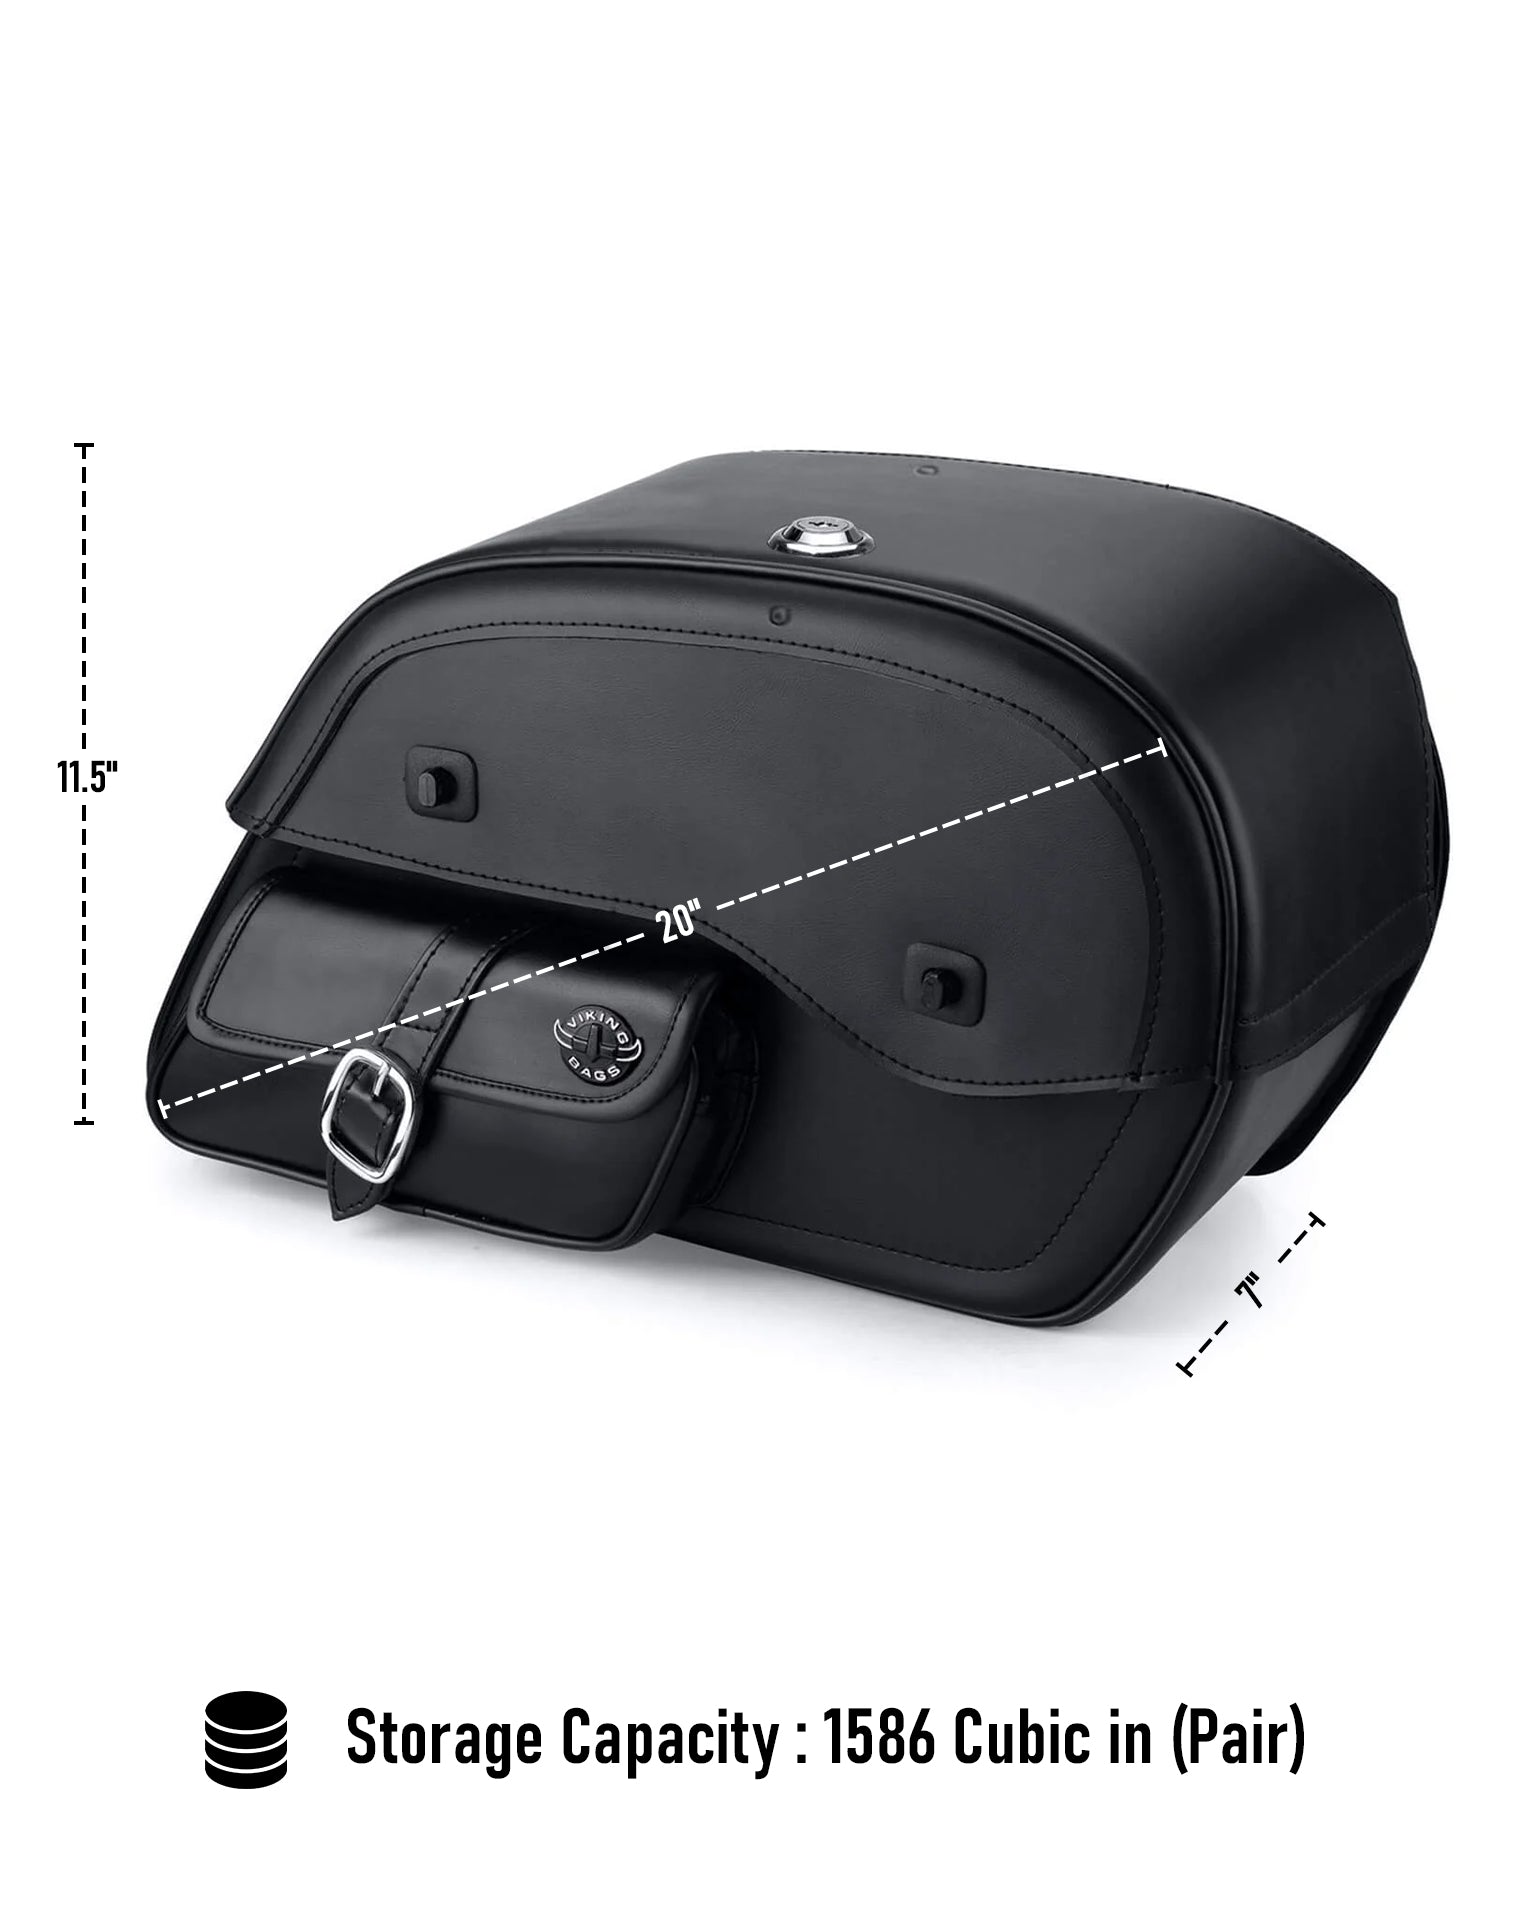 Viking Essential Side Pocket Large Shock Cutout Leather Motorcycle Saddlebags For Harley Sportster 883 Low Xl883L Can Store Your Ridings Gears